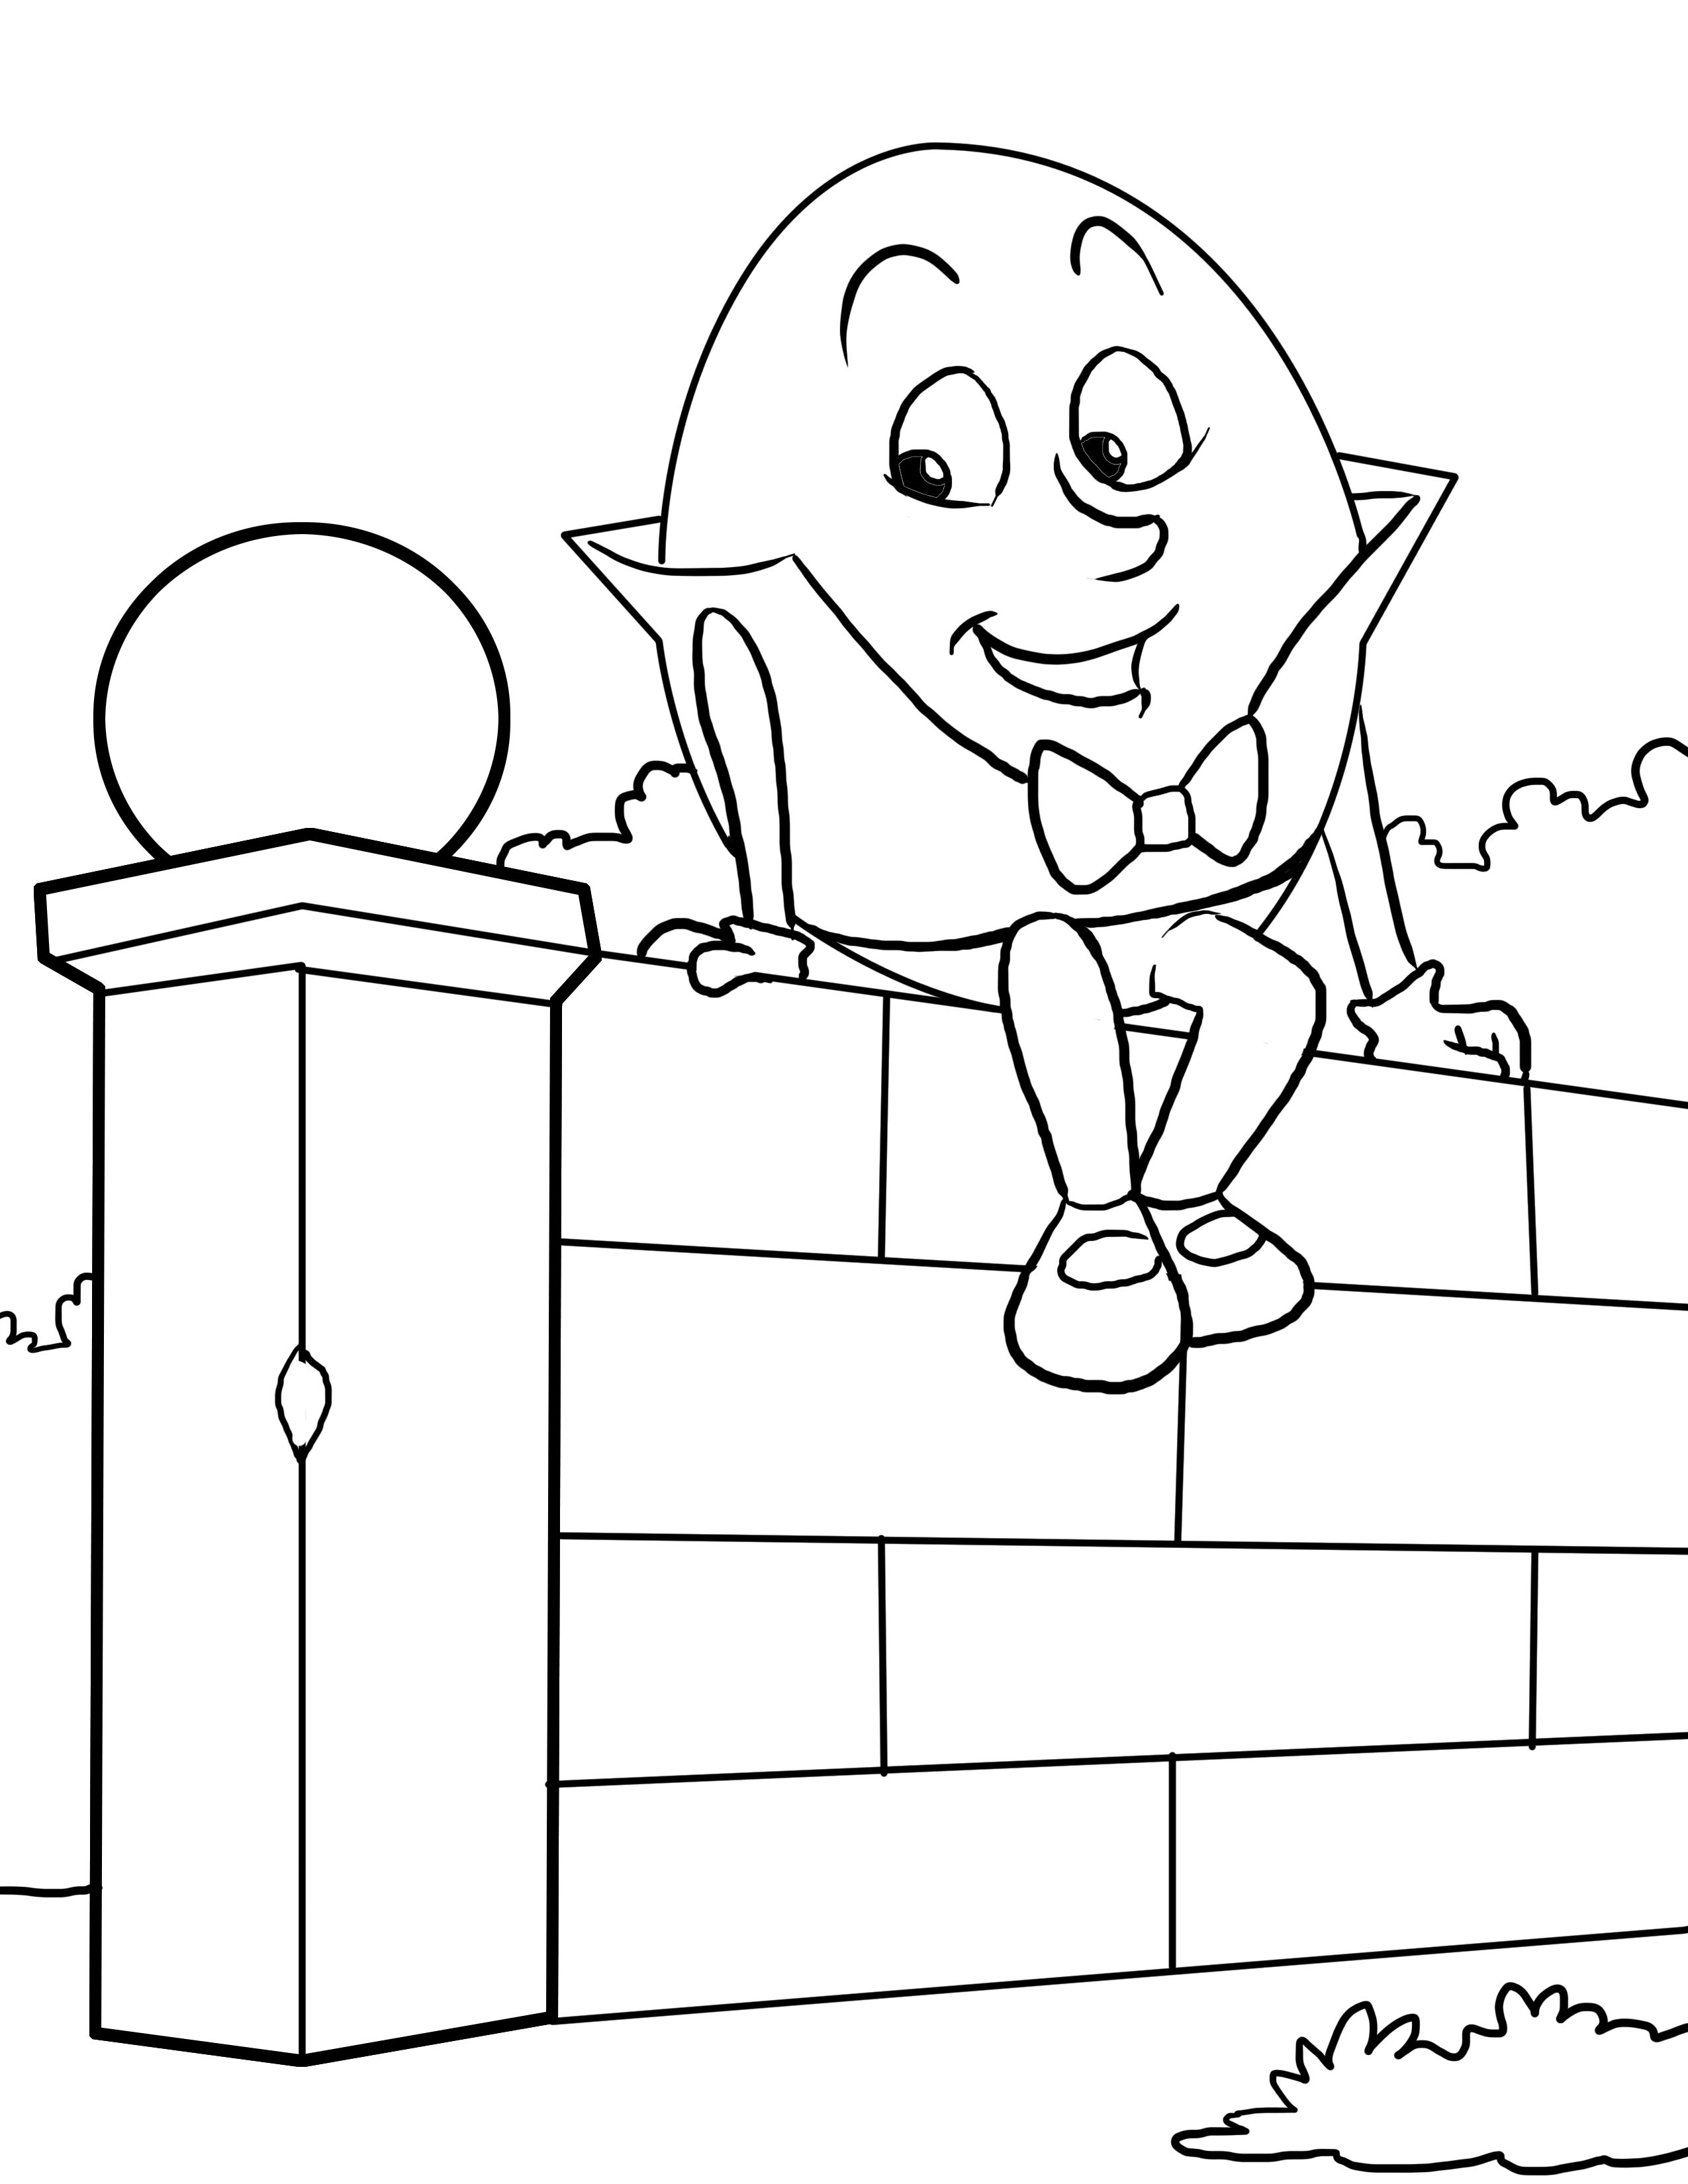 humpty-dumpty-clipart-colouring-page-humpty-dumpty-colouring-page-transparent-free-for-download